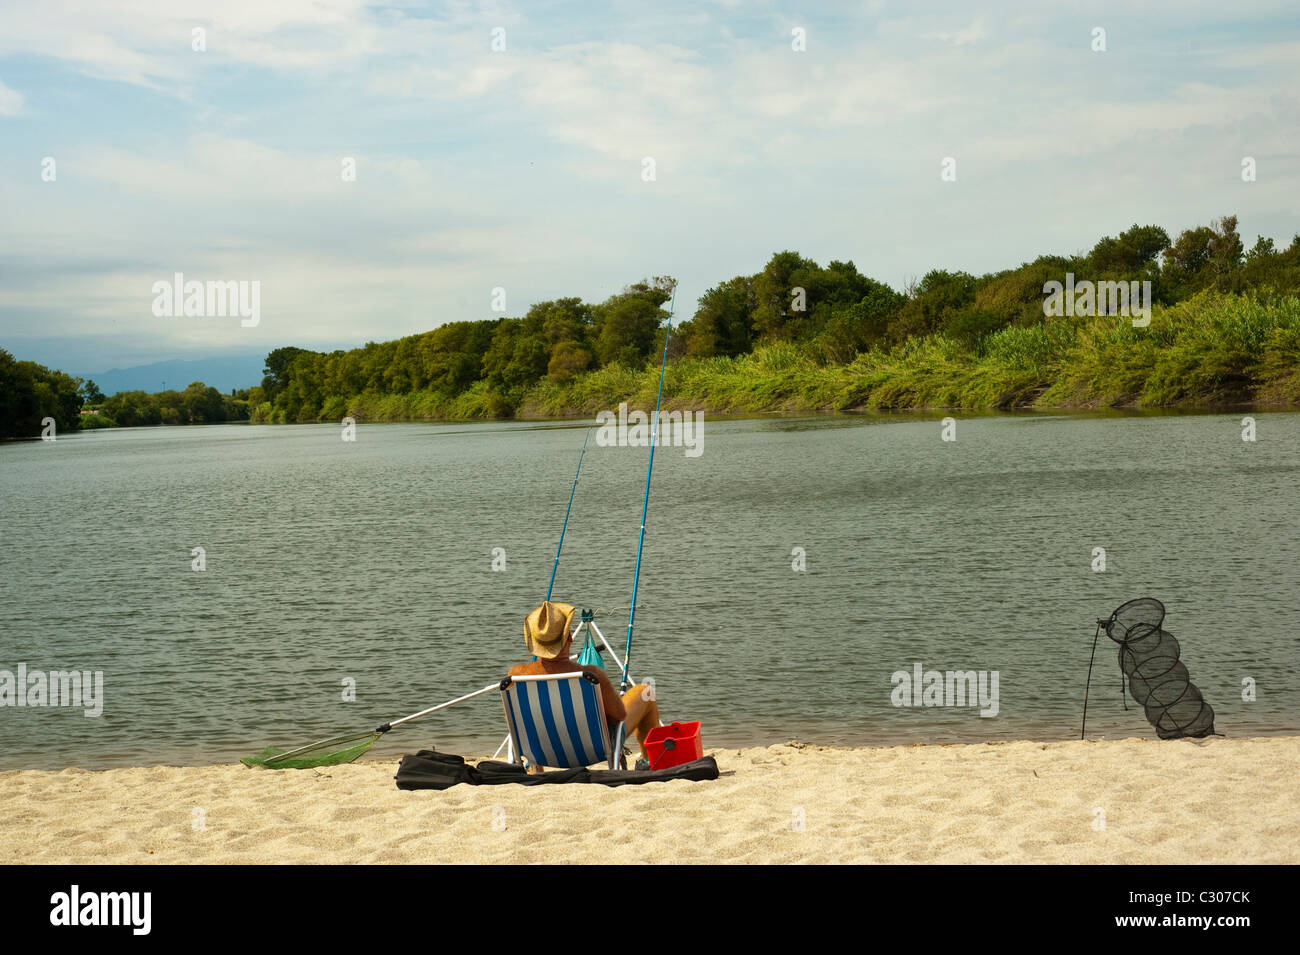 Canet-en-Roussillon, France, Senior Man Relaxing and Fishing on